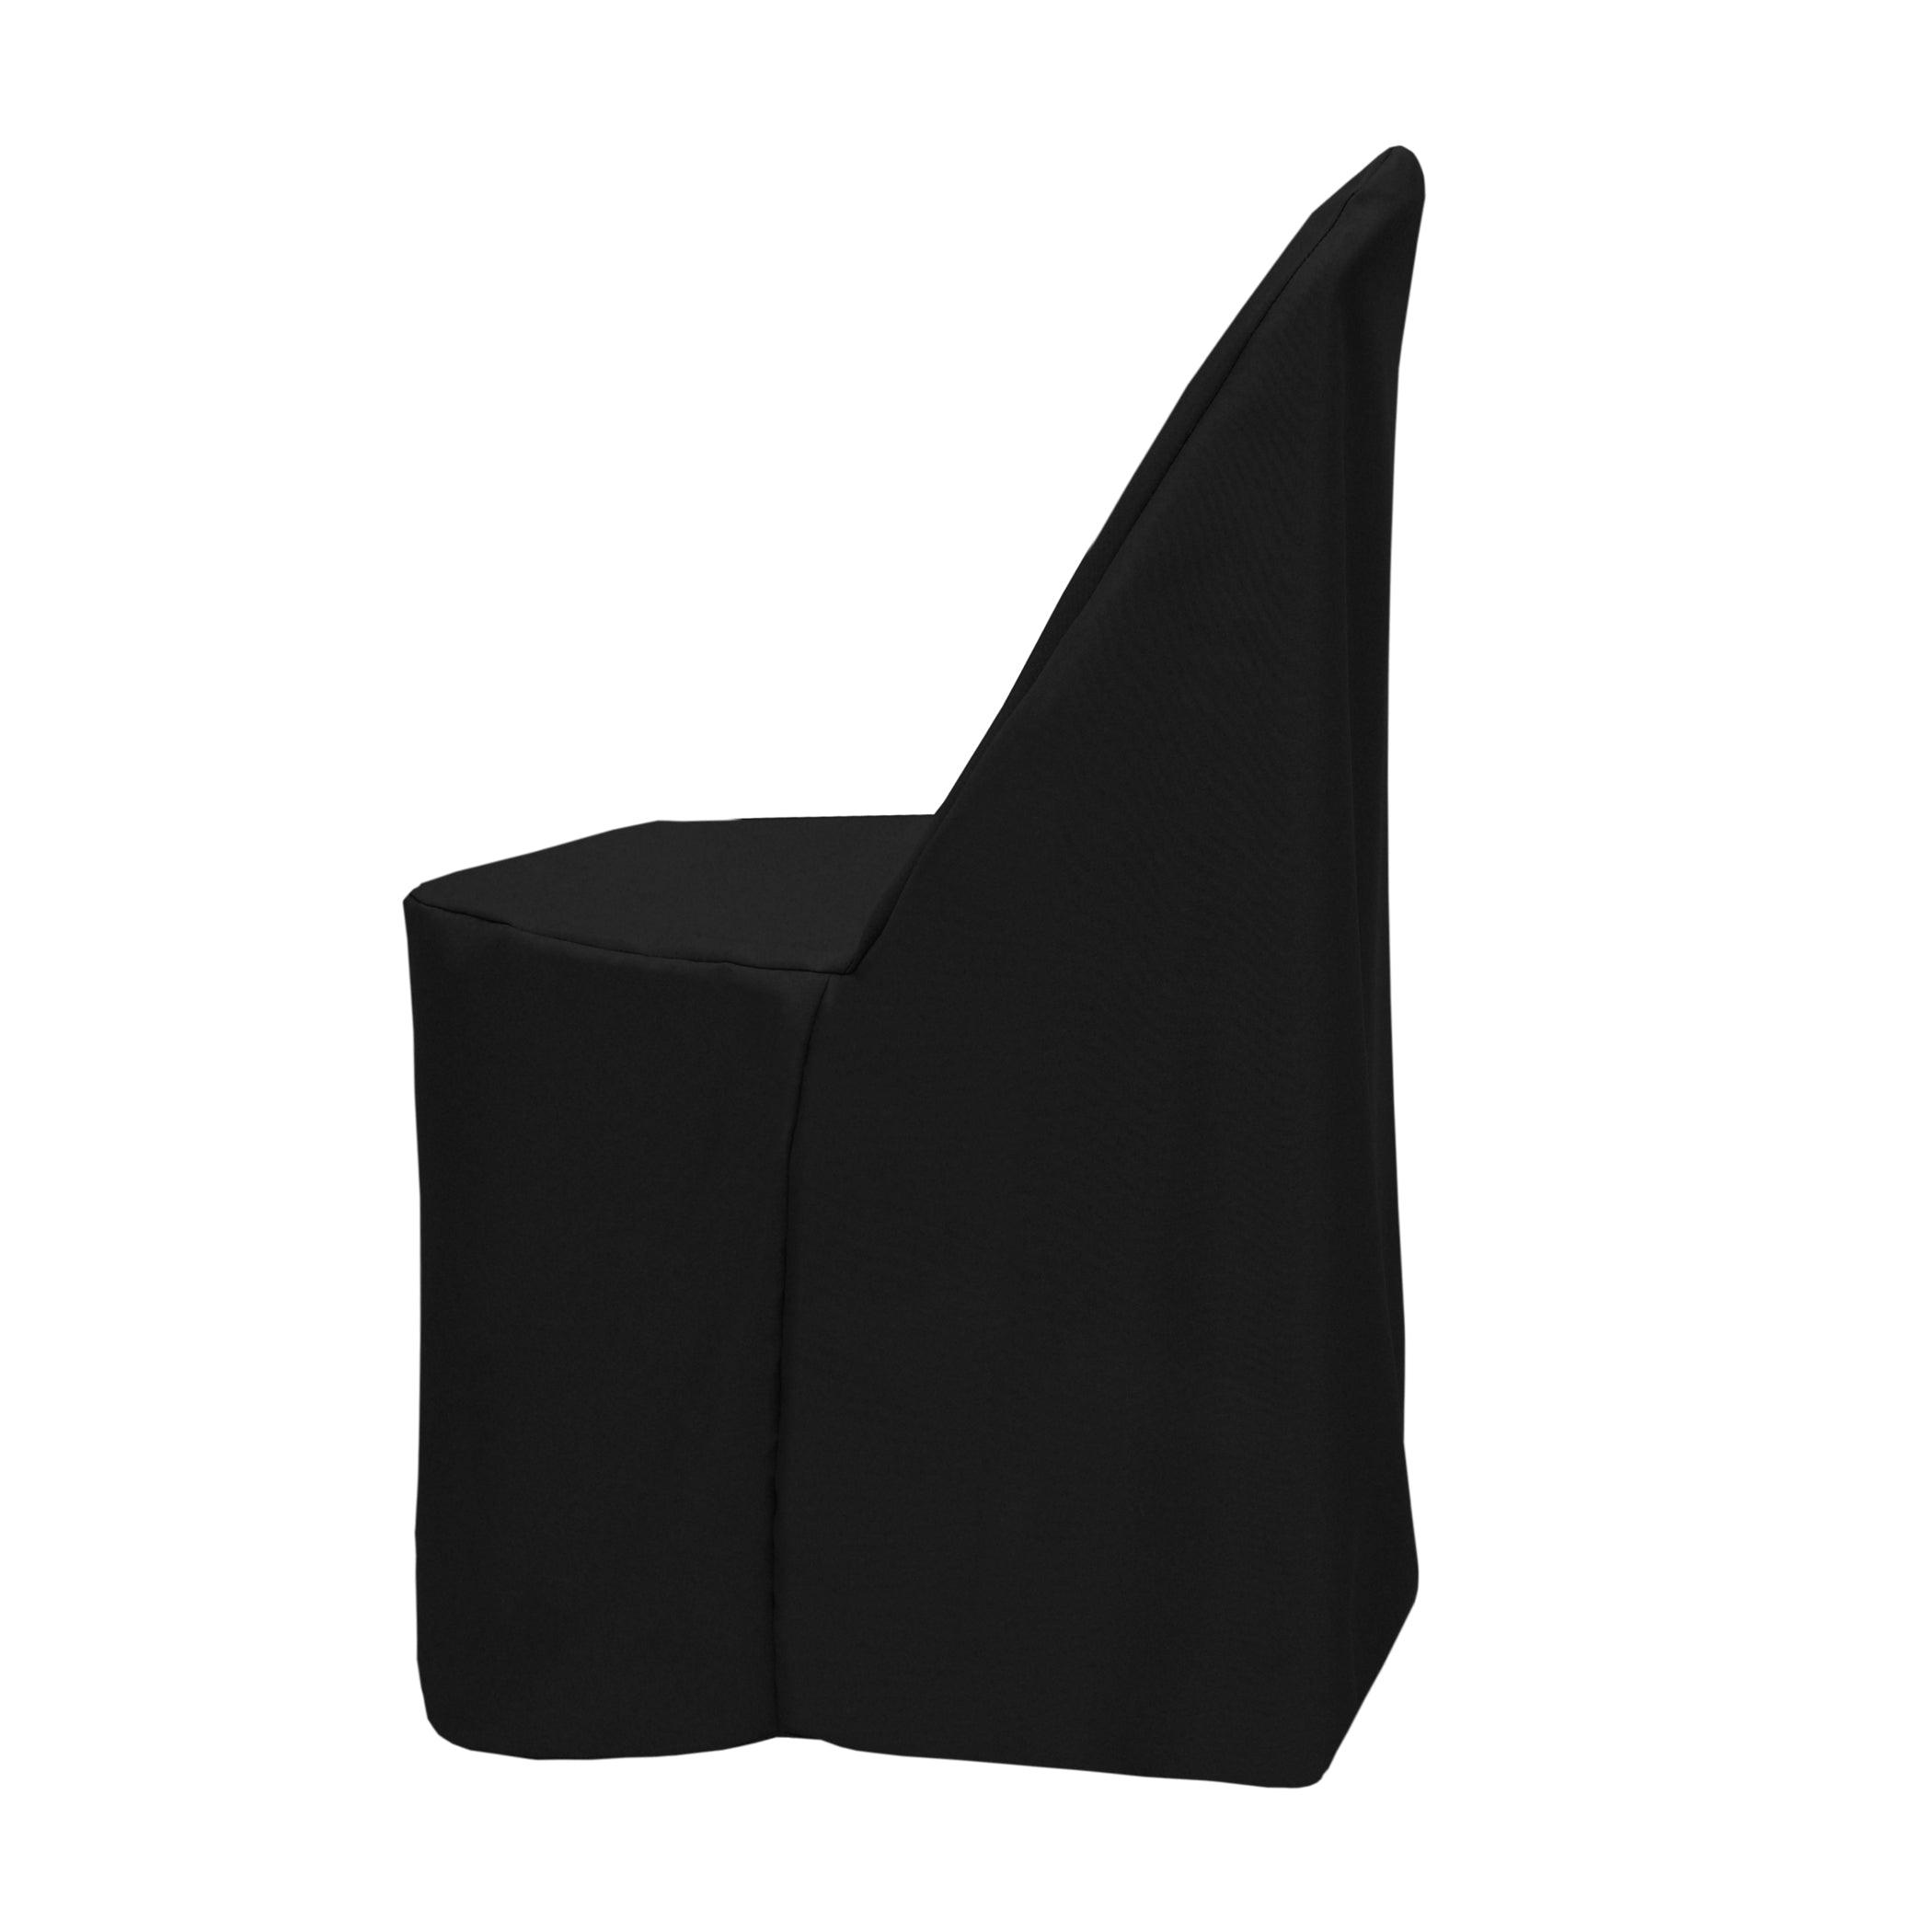 Black Chair Cover Hire, Mail Order Available